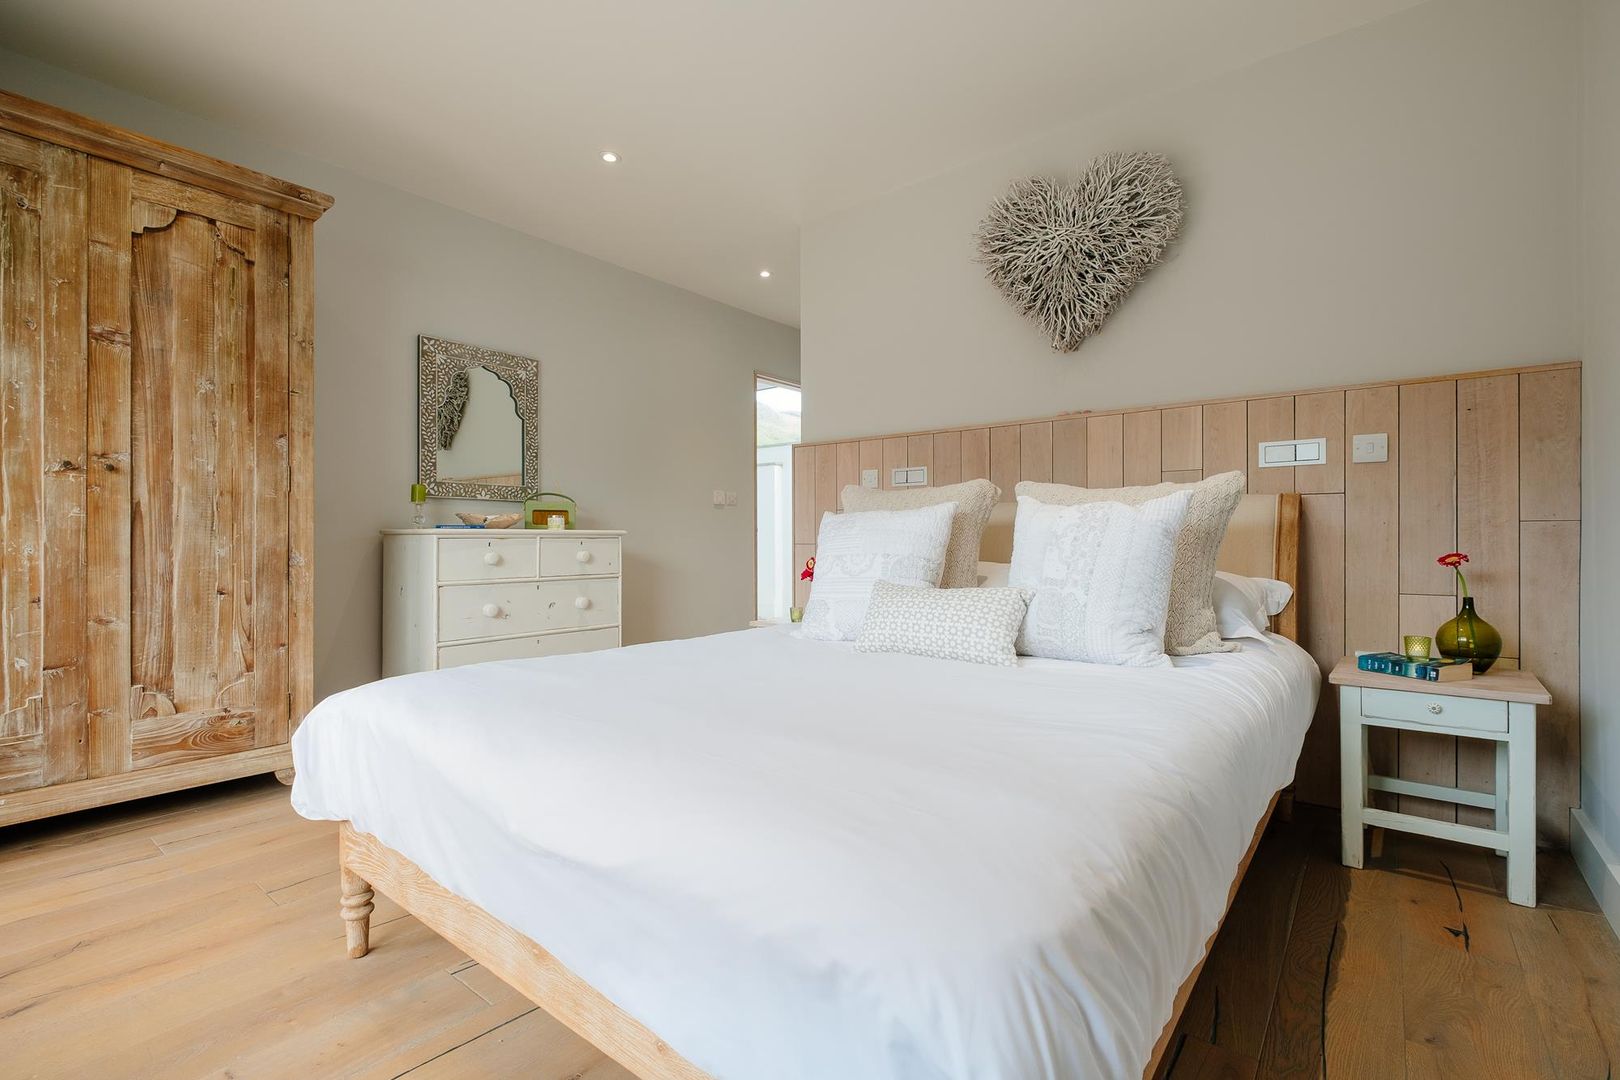 Treasure House, Polzeath | Cornwall, Perfect Stays Perfect Stays Rustikale Schlafzimmer bedroom,wood,rustic wood,luxury,holiday home,beach house